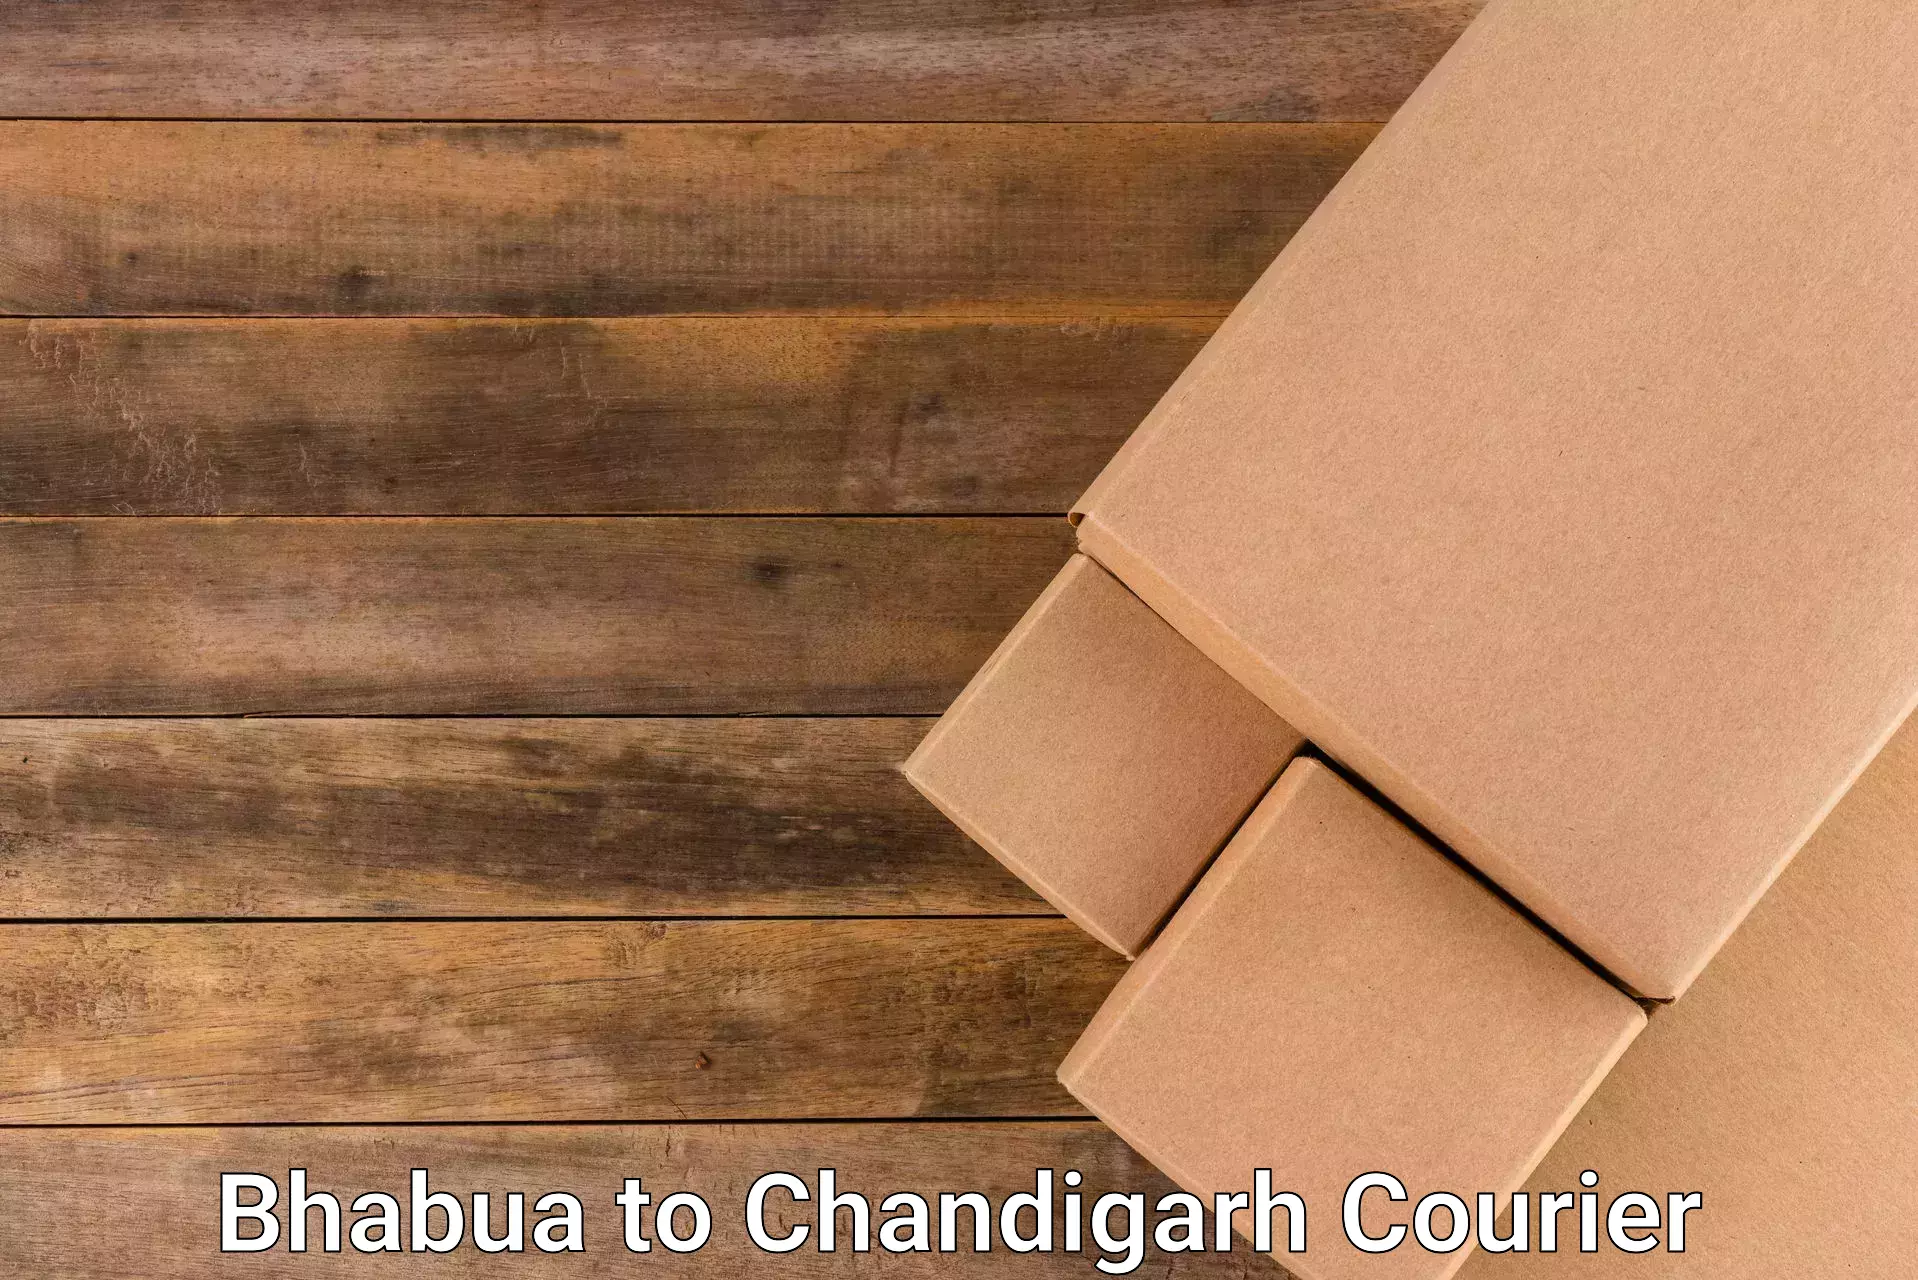 Fast delivery service Bhabua to Chandigarh